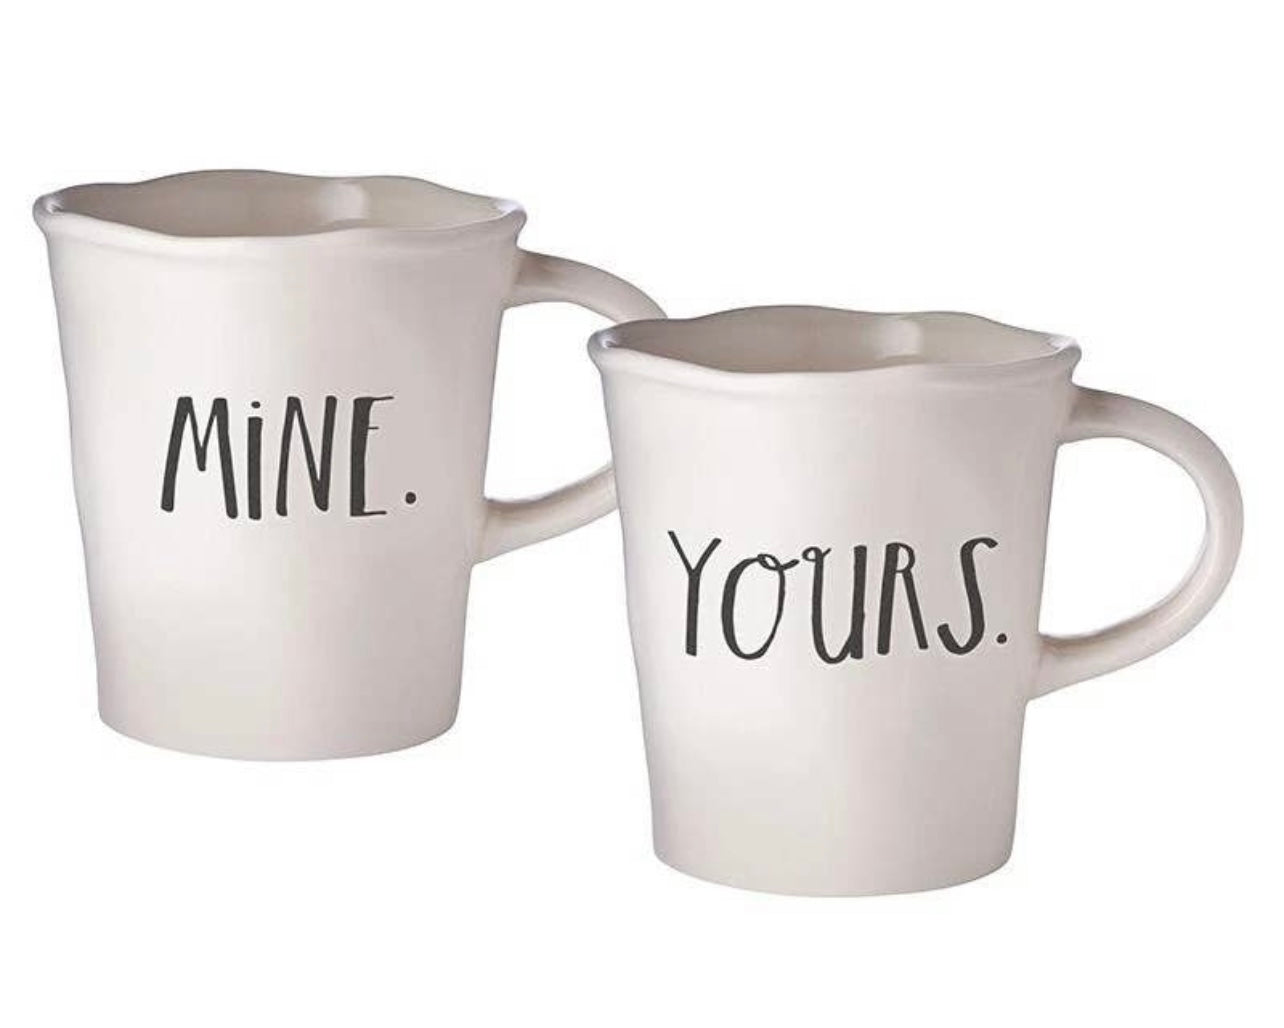 RAE DUNN STEM PRINT MINE AND YOURS CAFE MUGS (Set of 2)